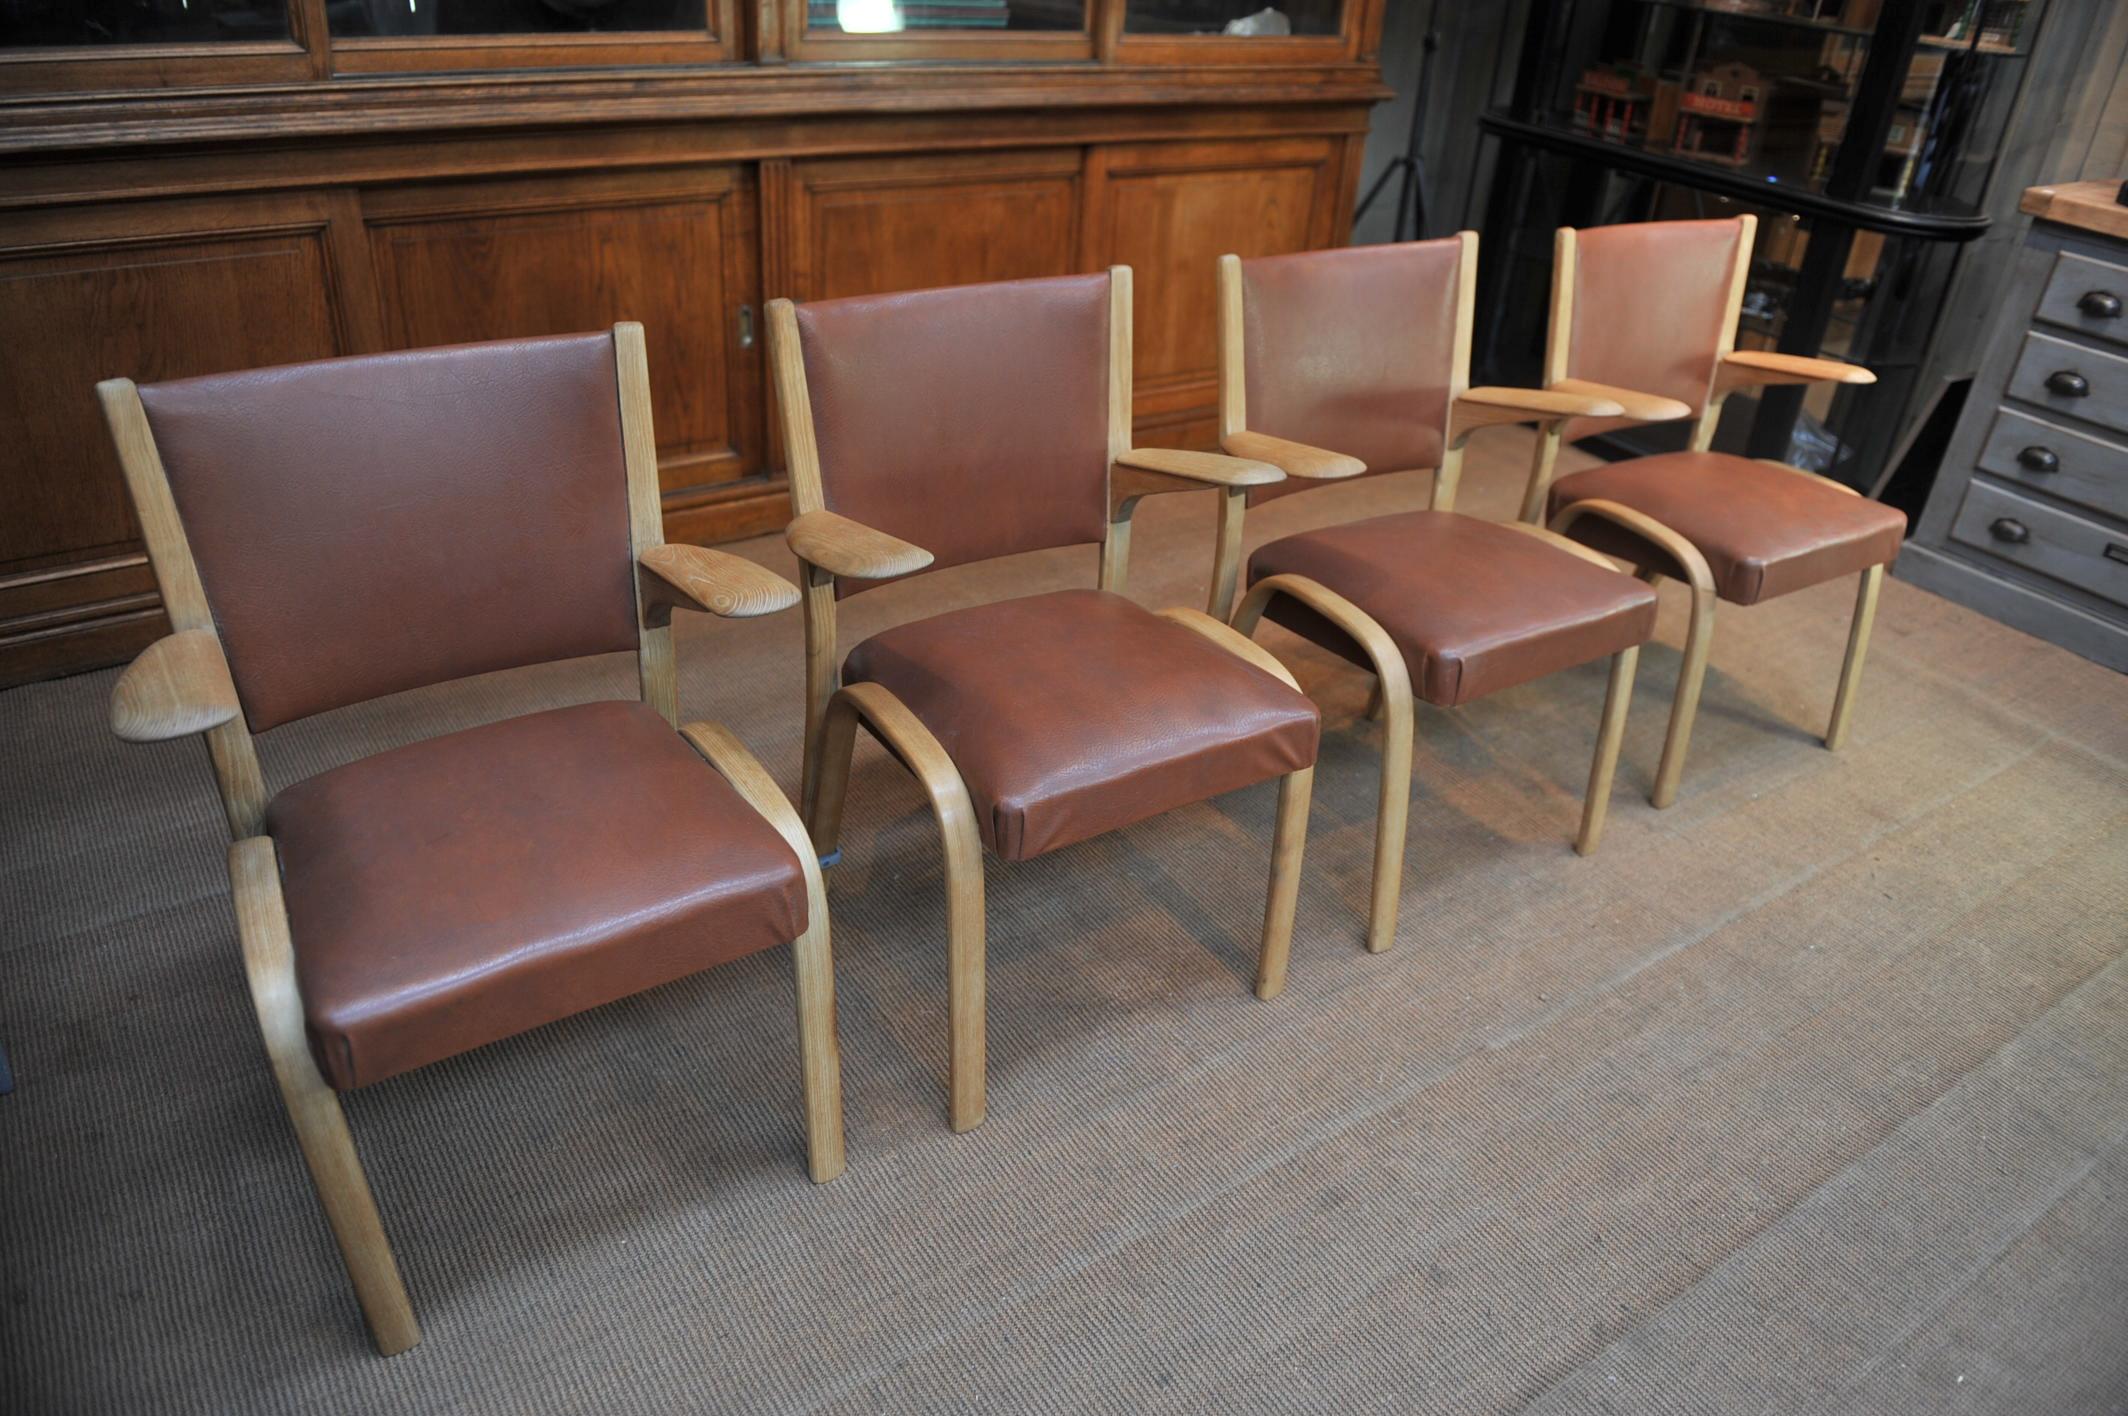 French Set of Four Elm Wood Chairs by Bow Wood France, circa 1950 For Sale